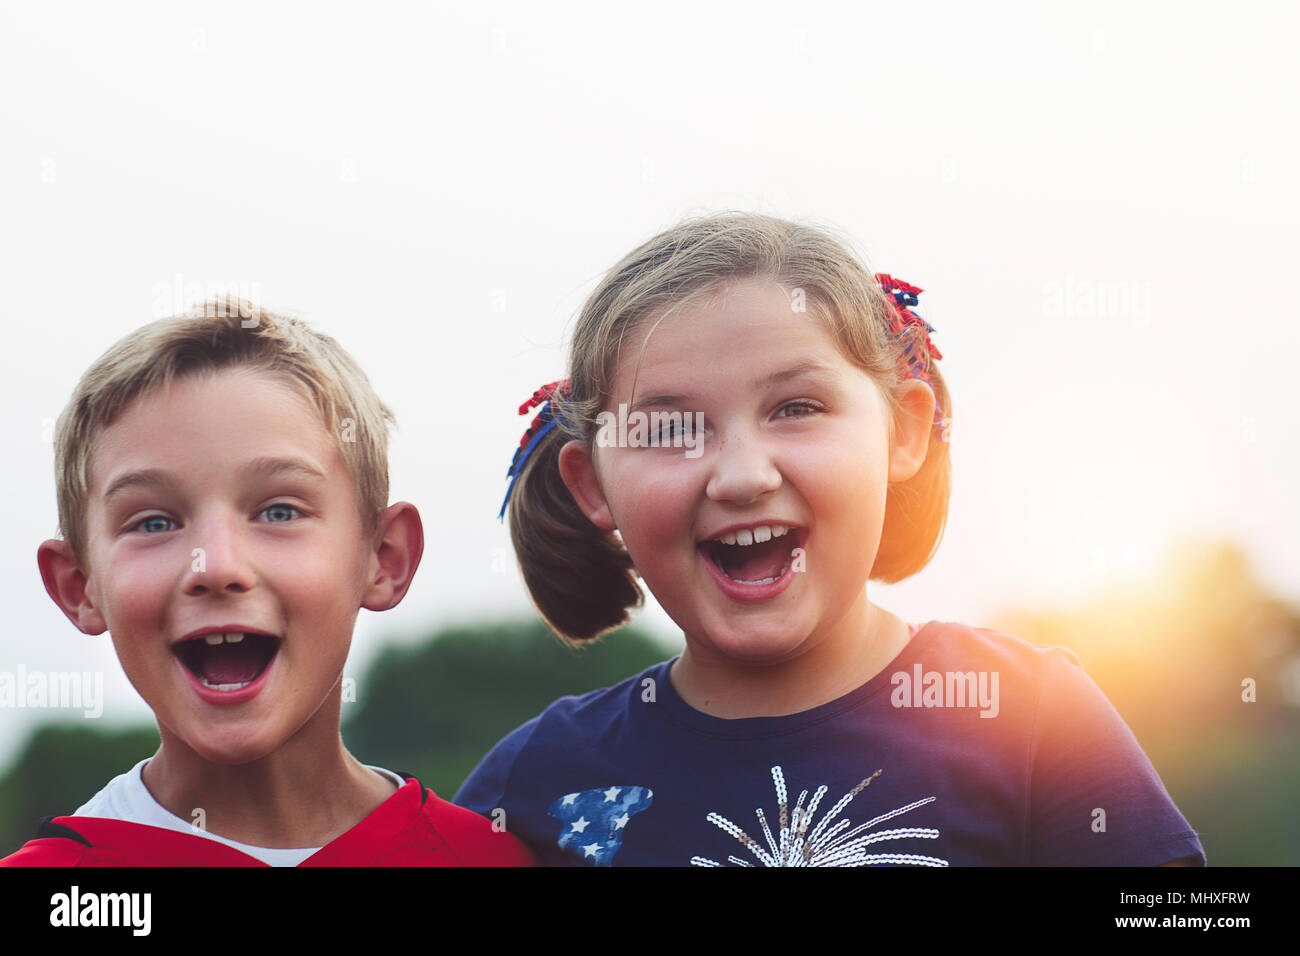 Portrait of boy and girl, mouths open, smiling, looking at camera Stock Photo